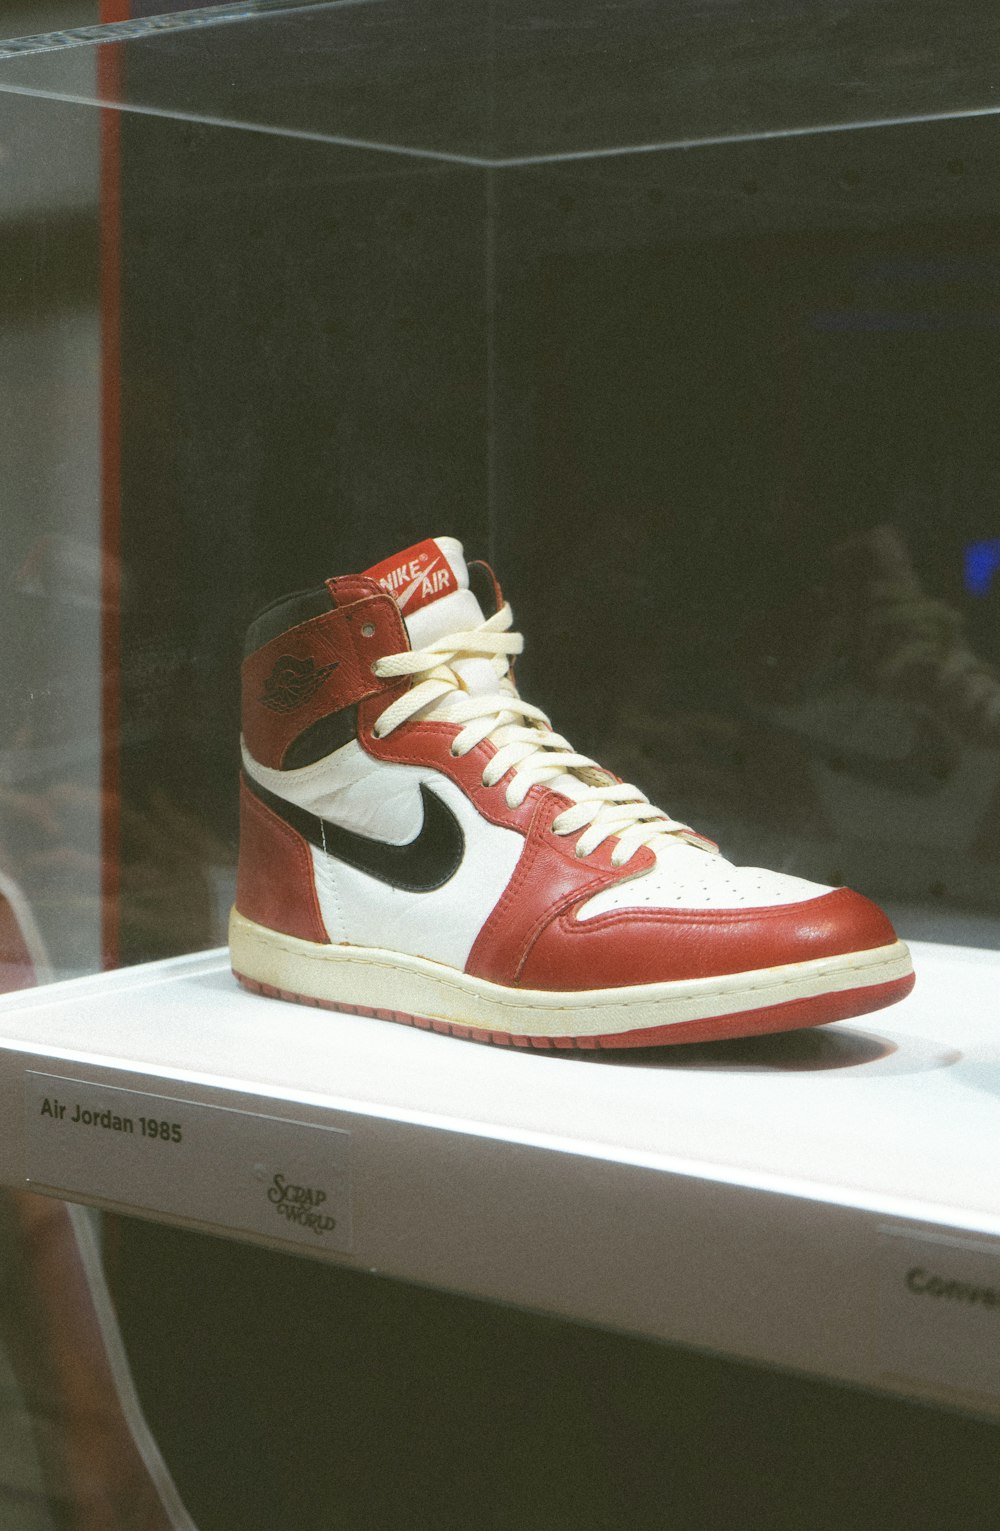 a pair of red and white sneakers on display